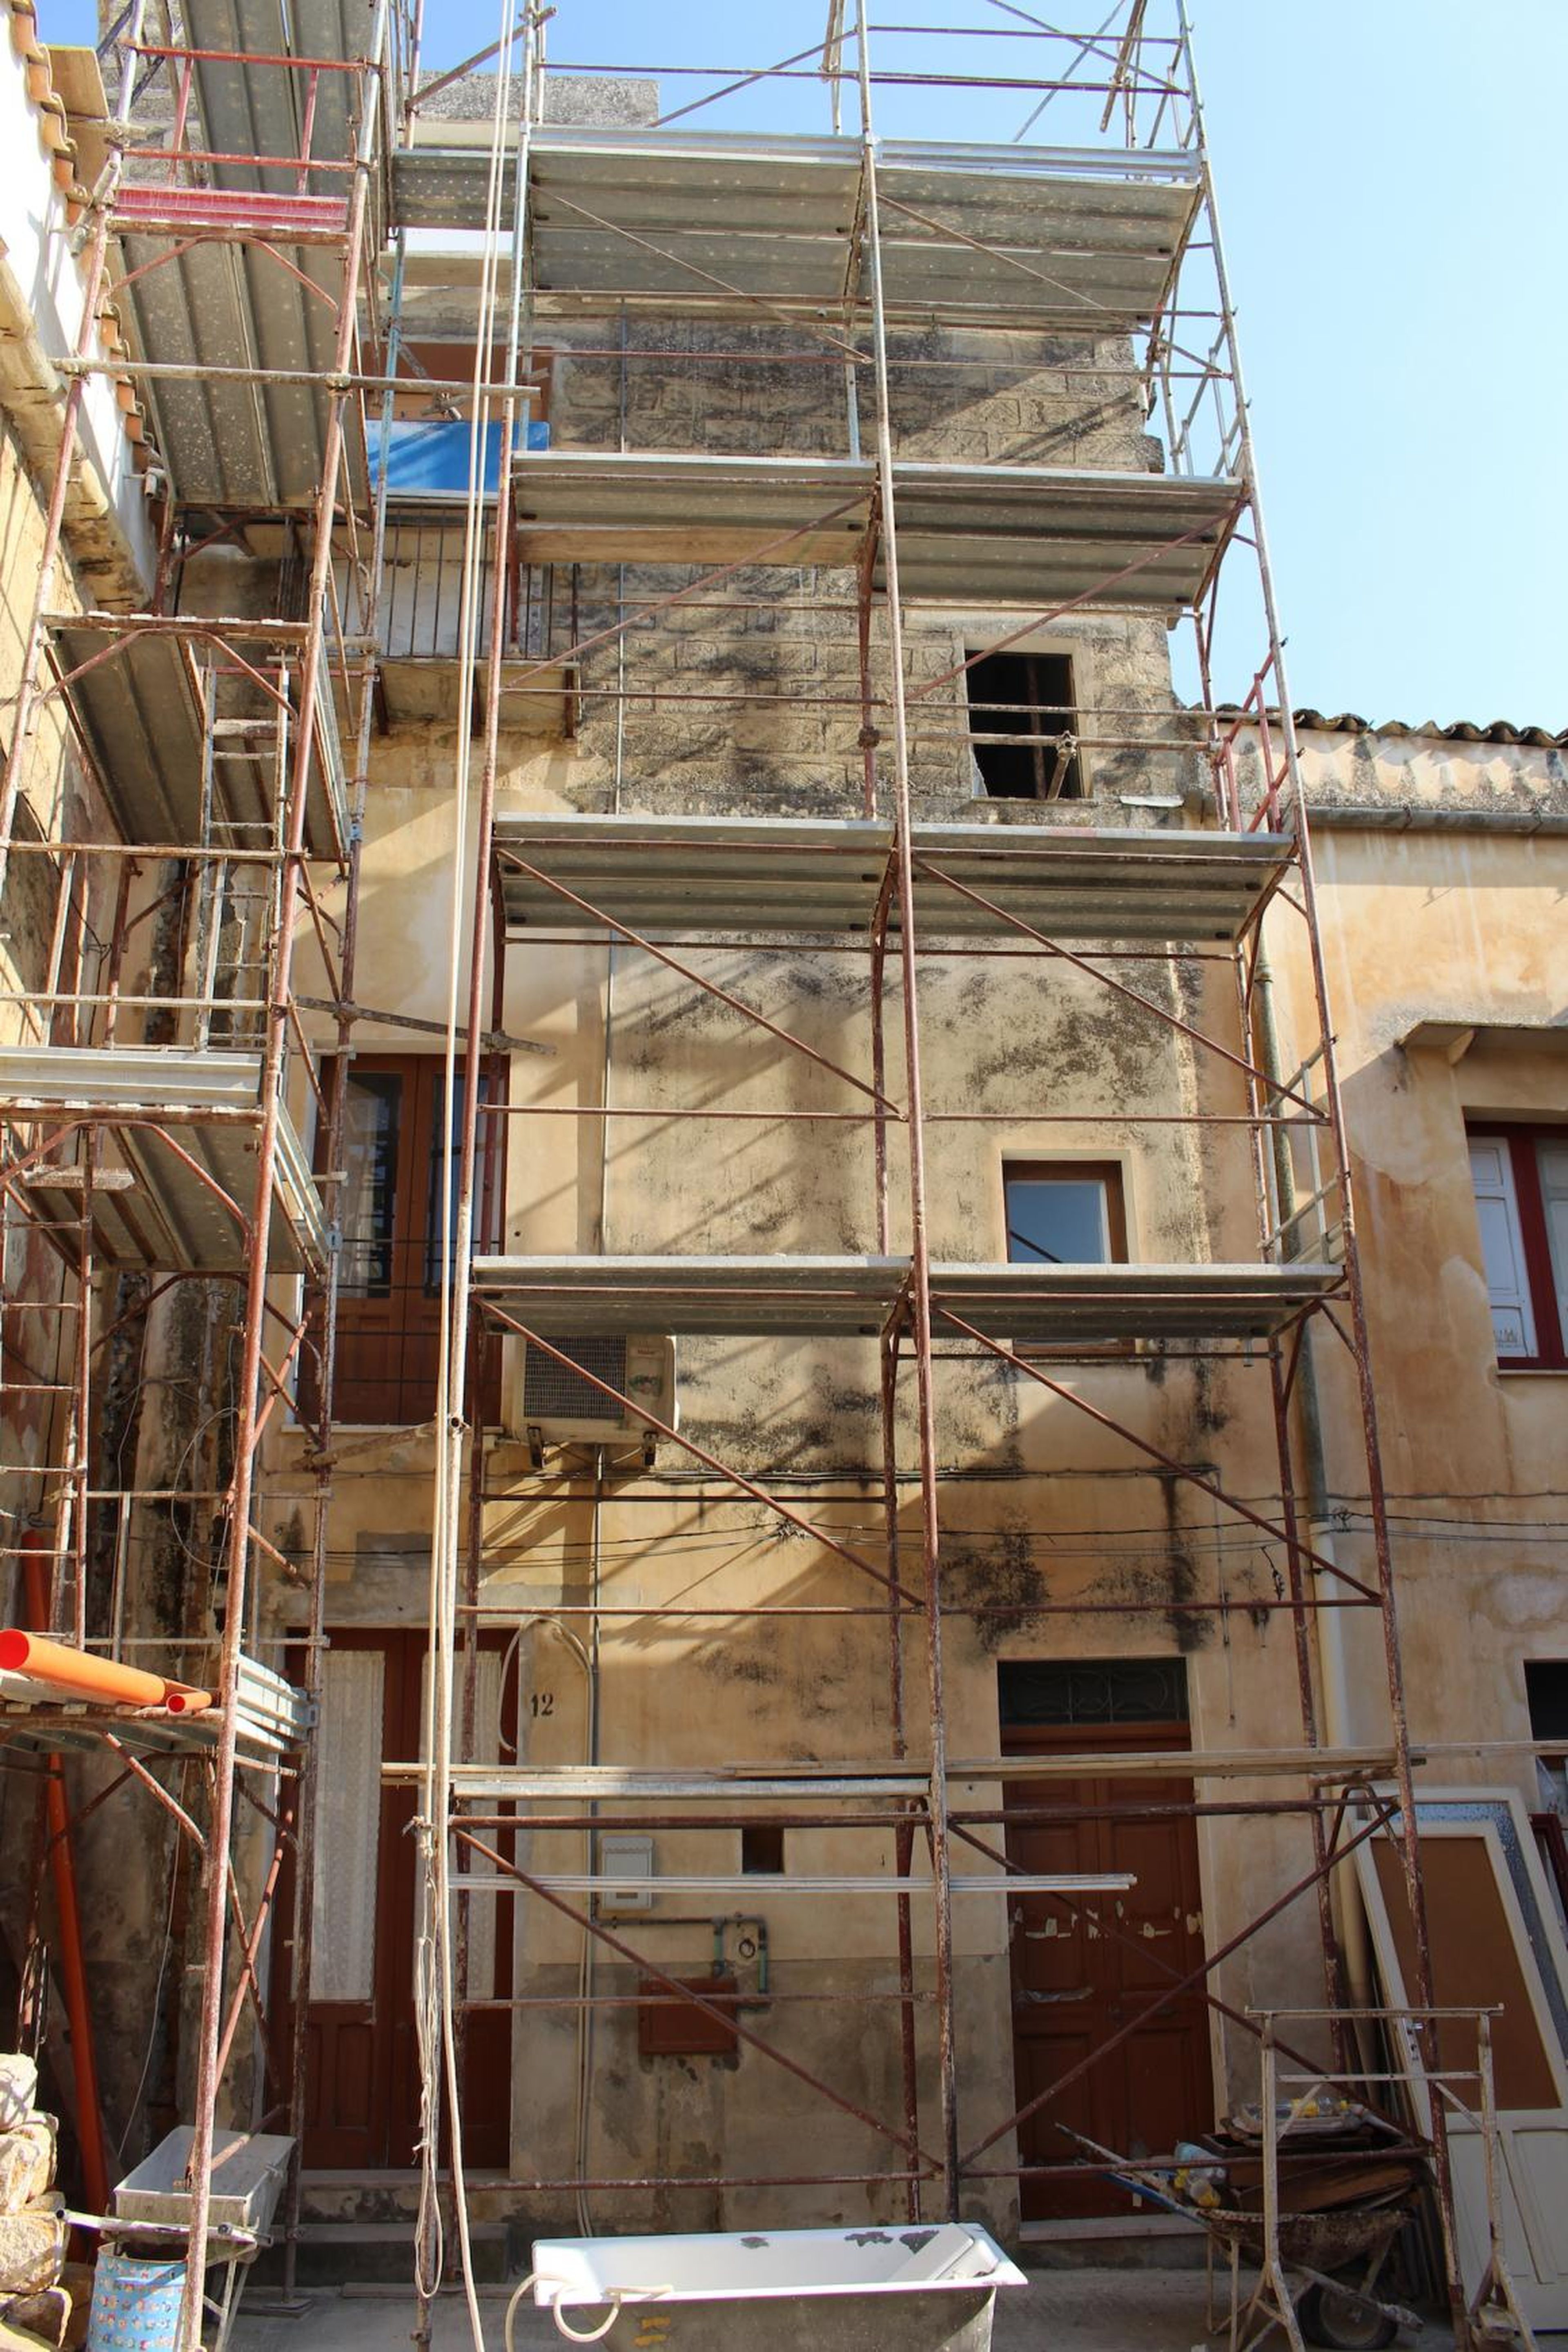 Many of the properties in town were covered in scaffolding.